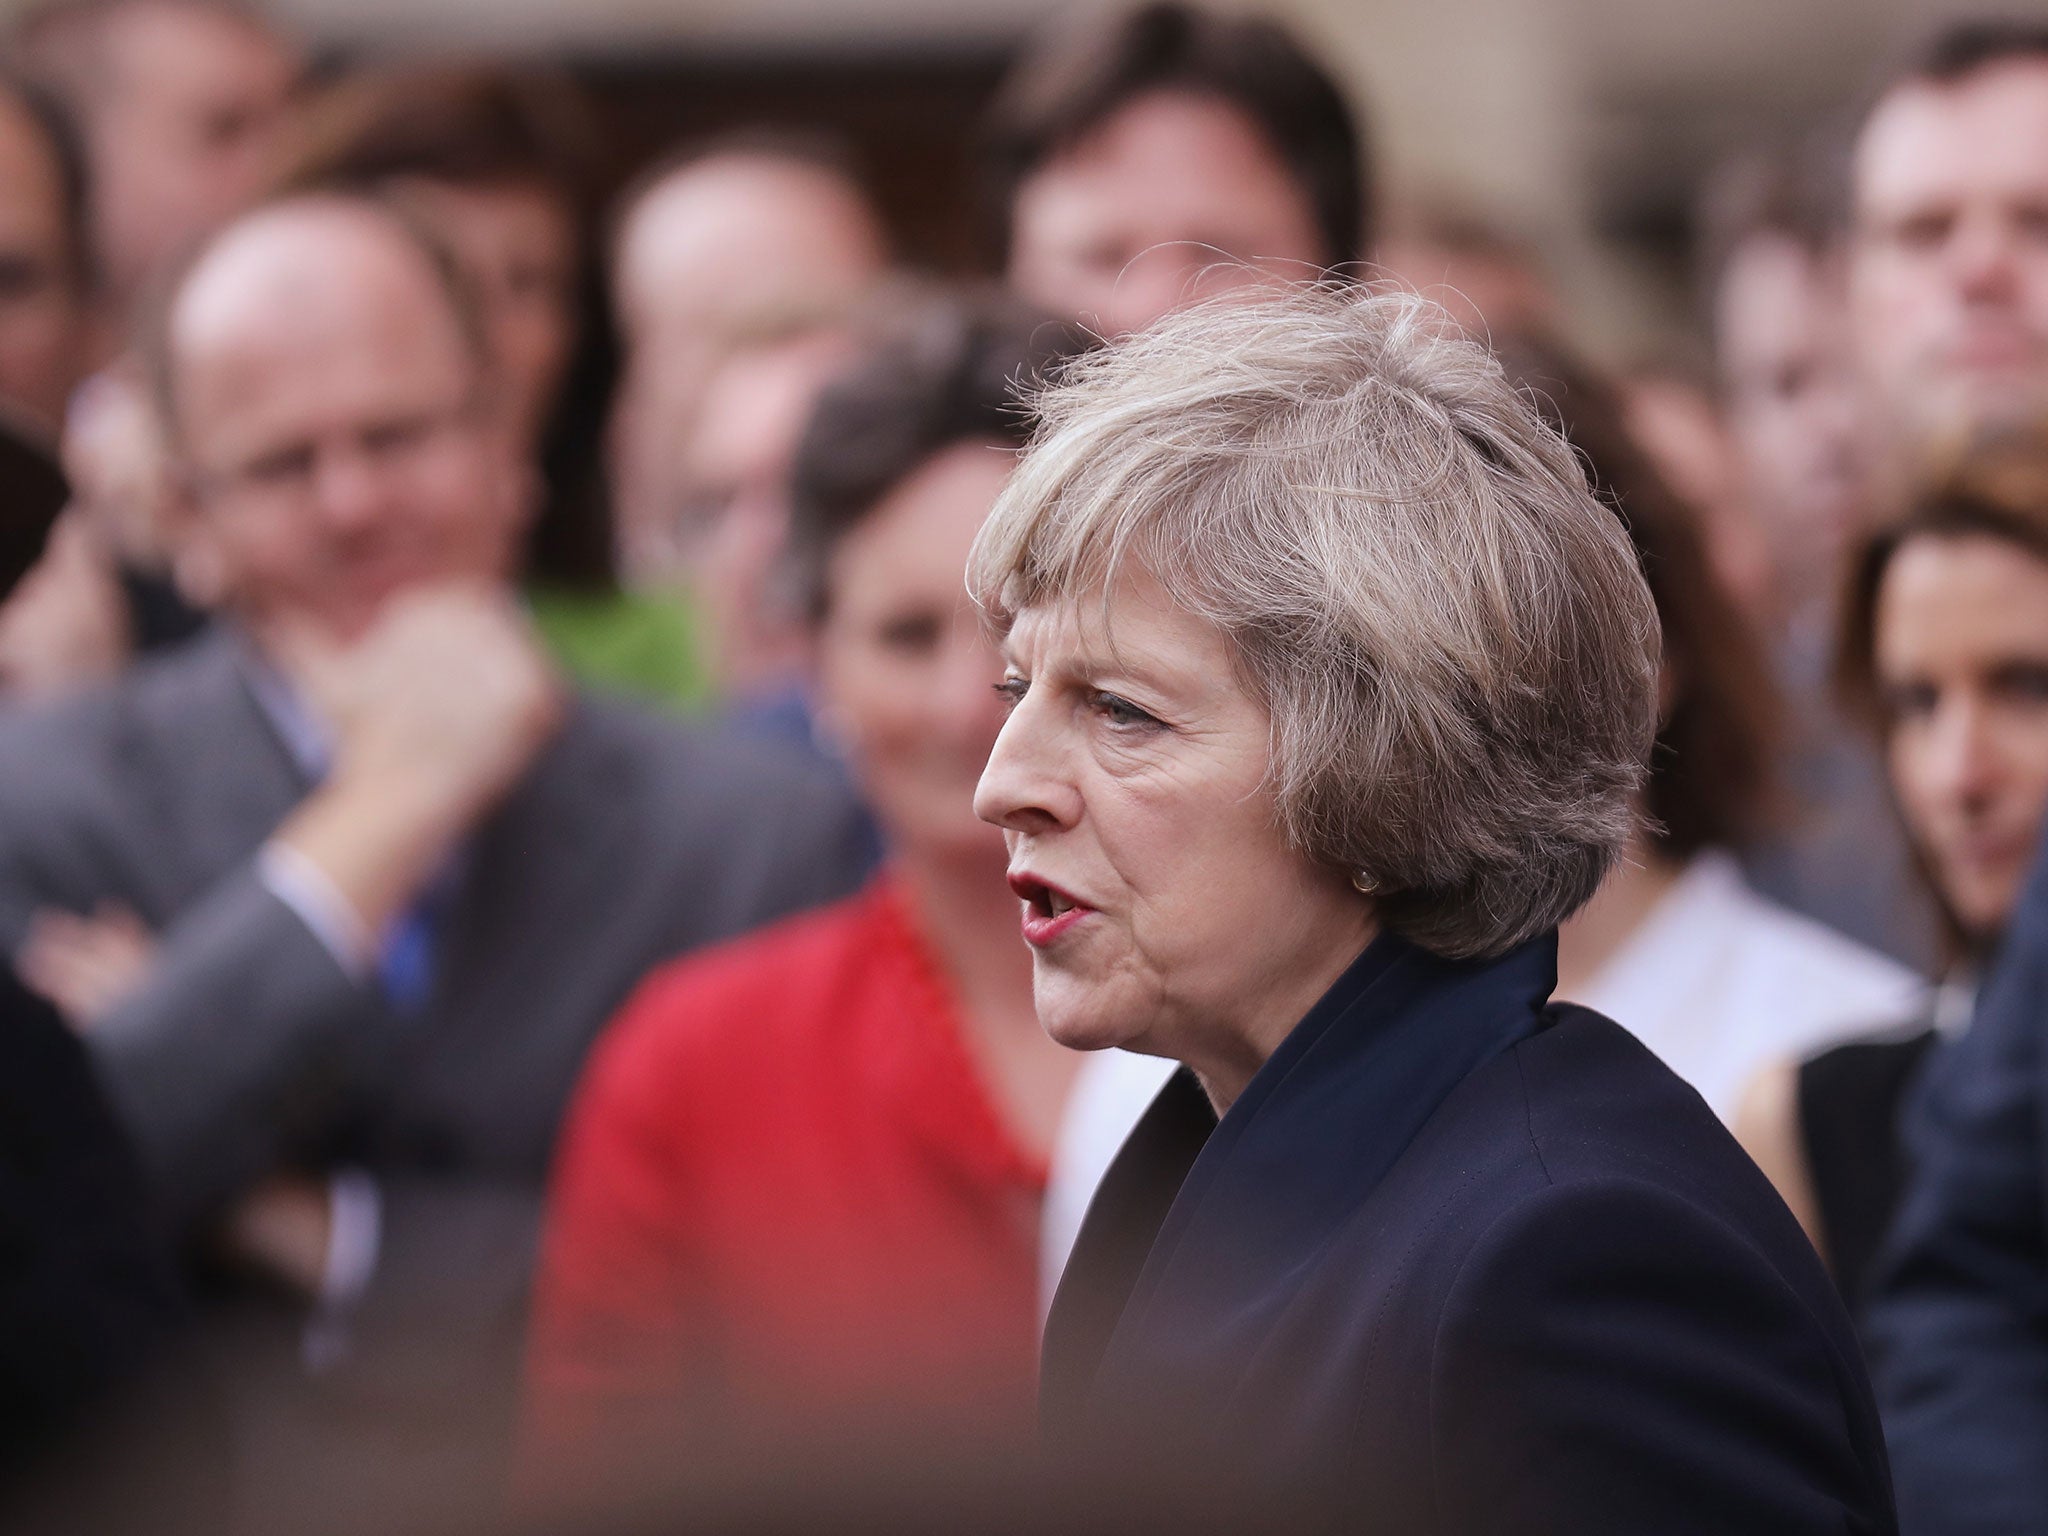 Theresa May's position as Home Secretary often put her at odds with campaigners over human rights